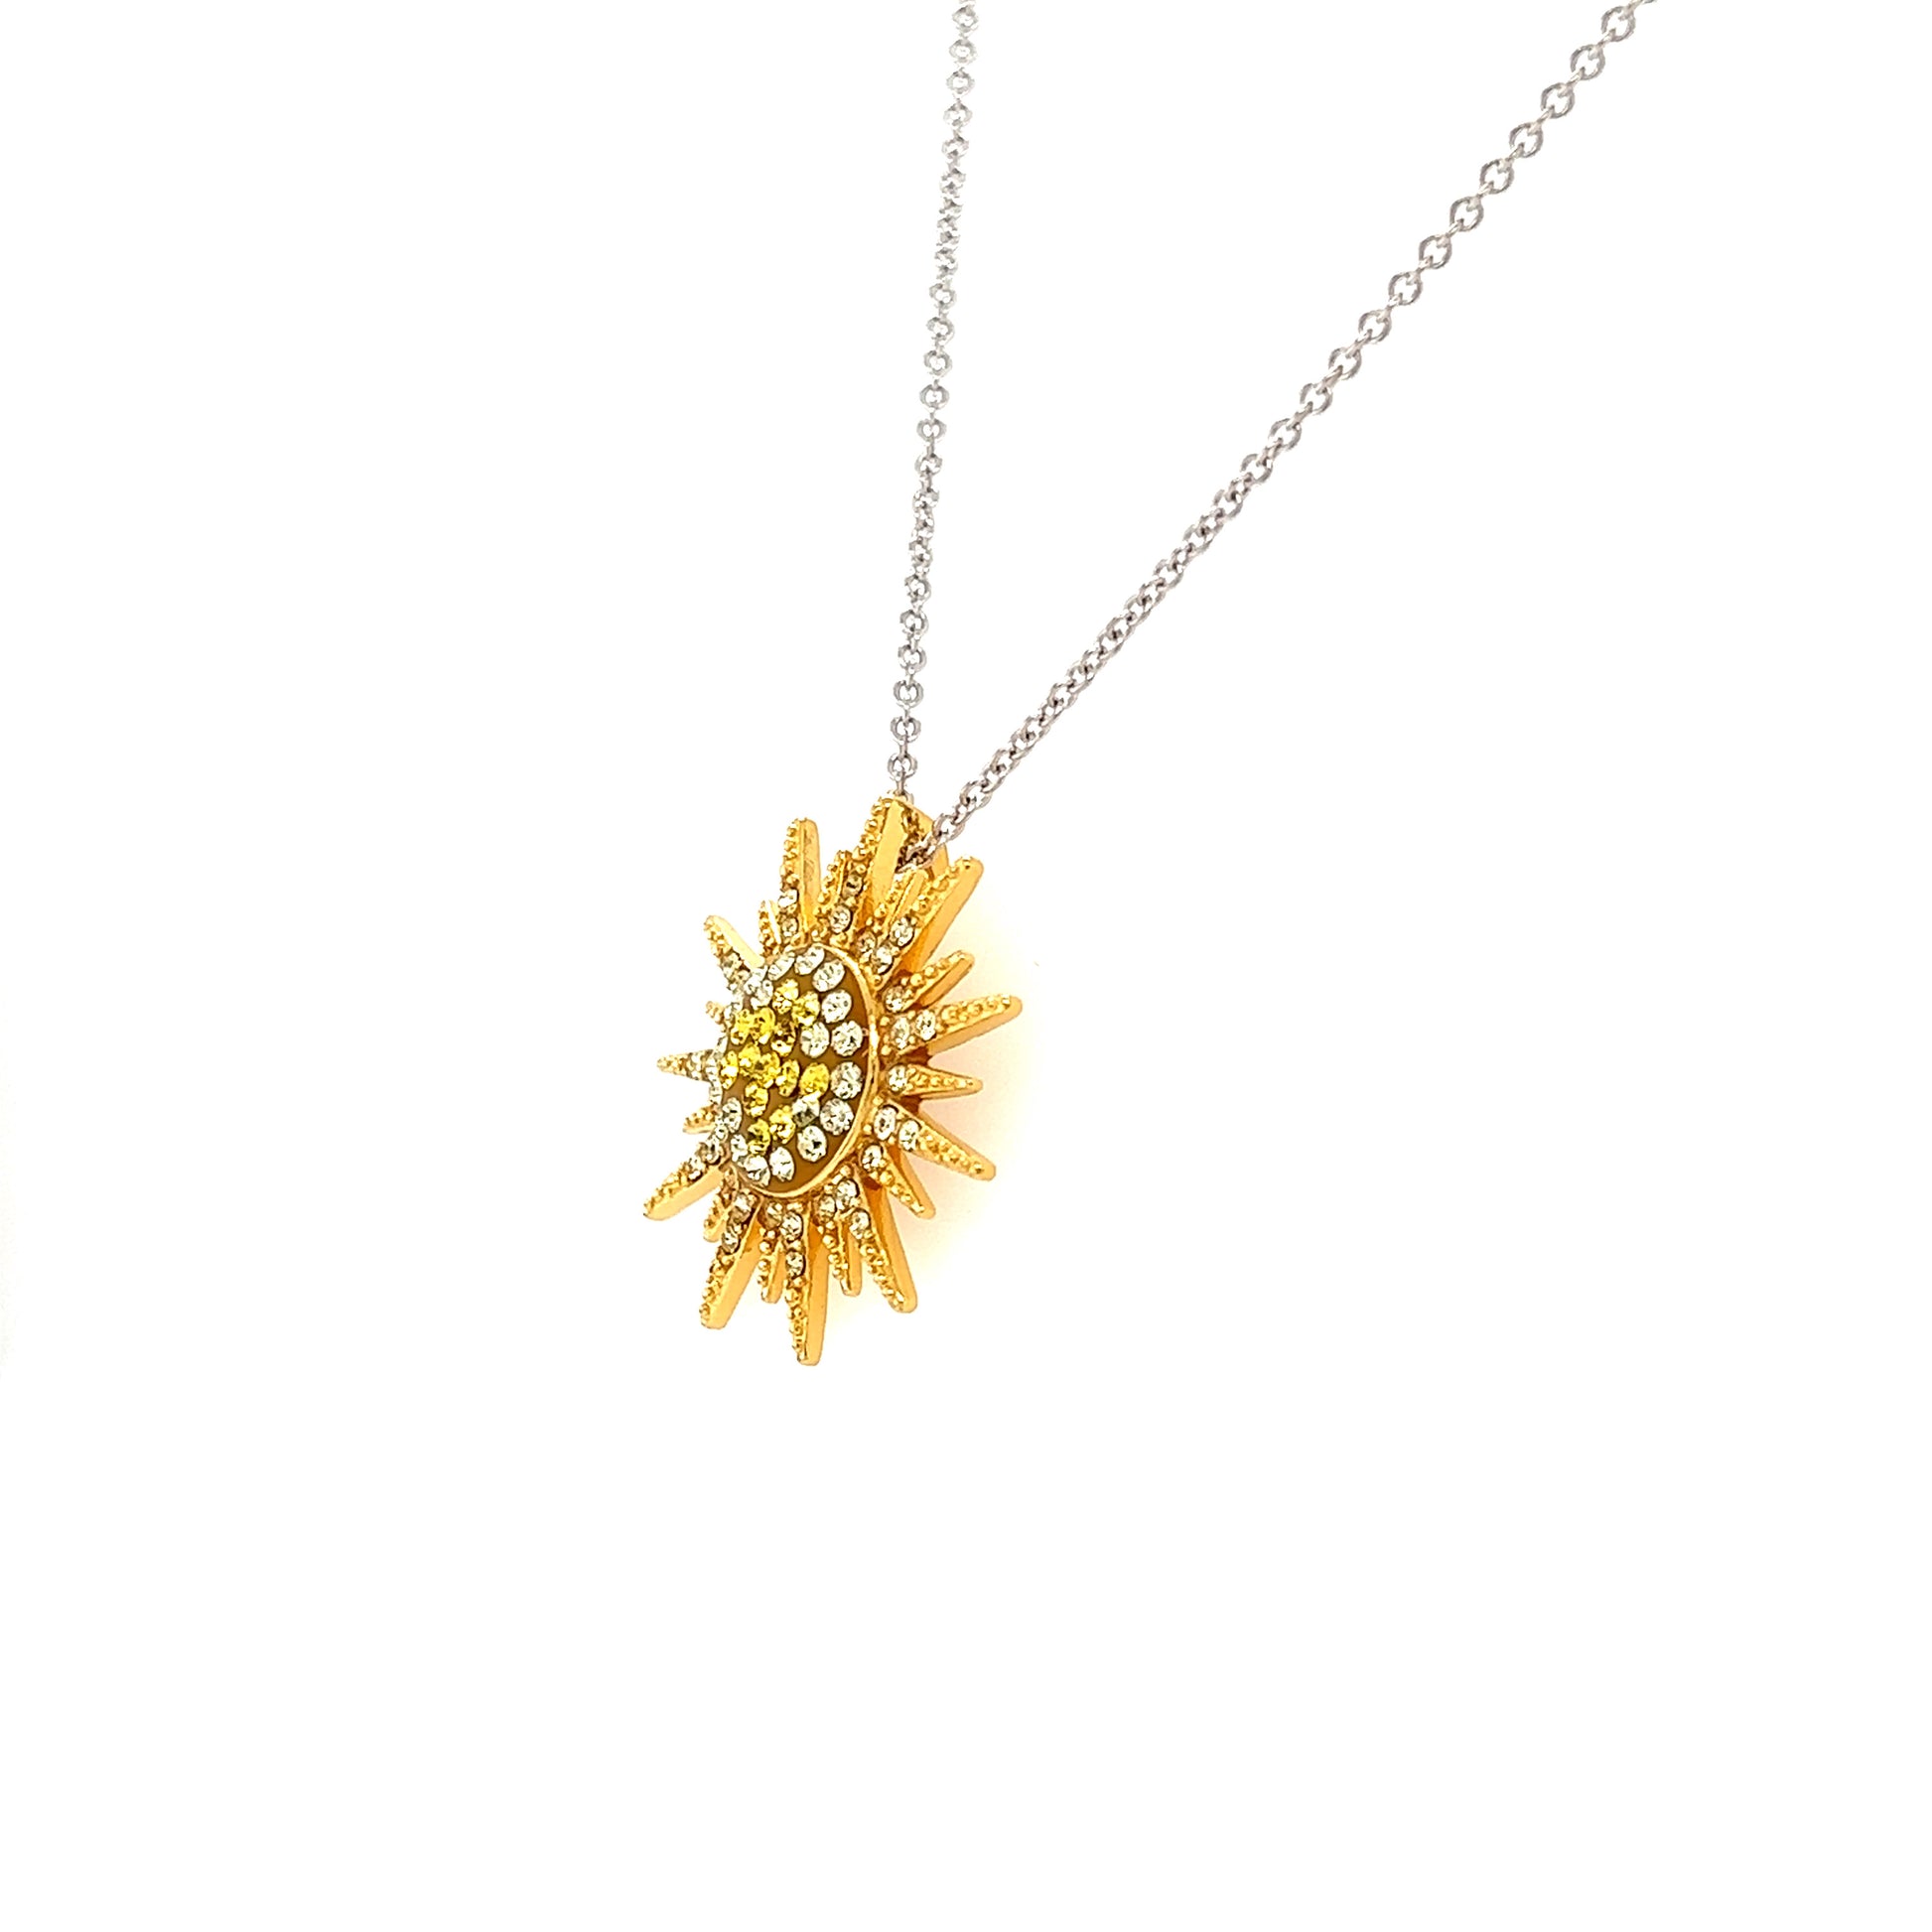 Sunburst Necklace With Yellow and White Crystals in Sterling Silver Right Side View